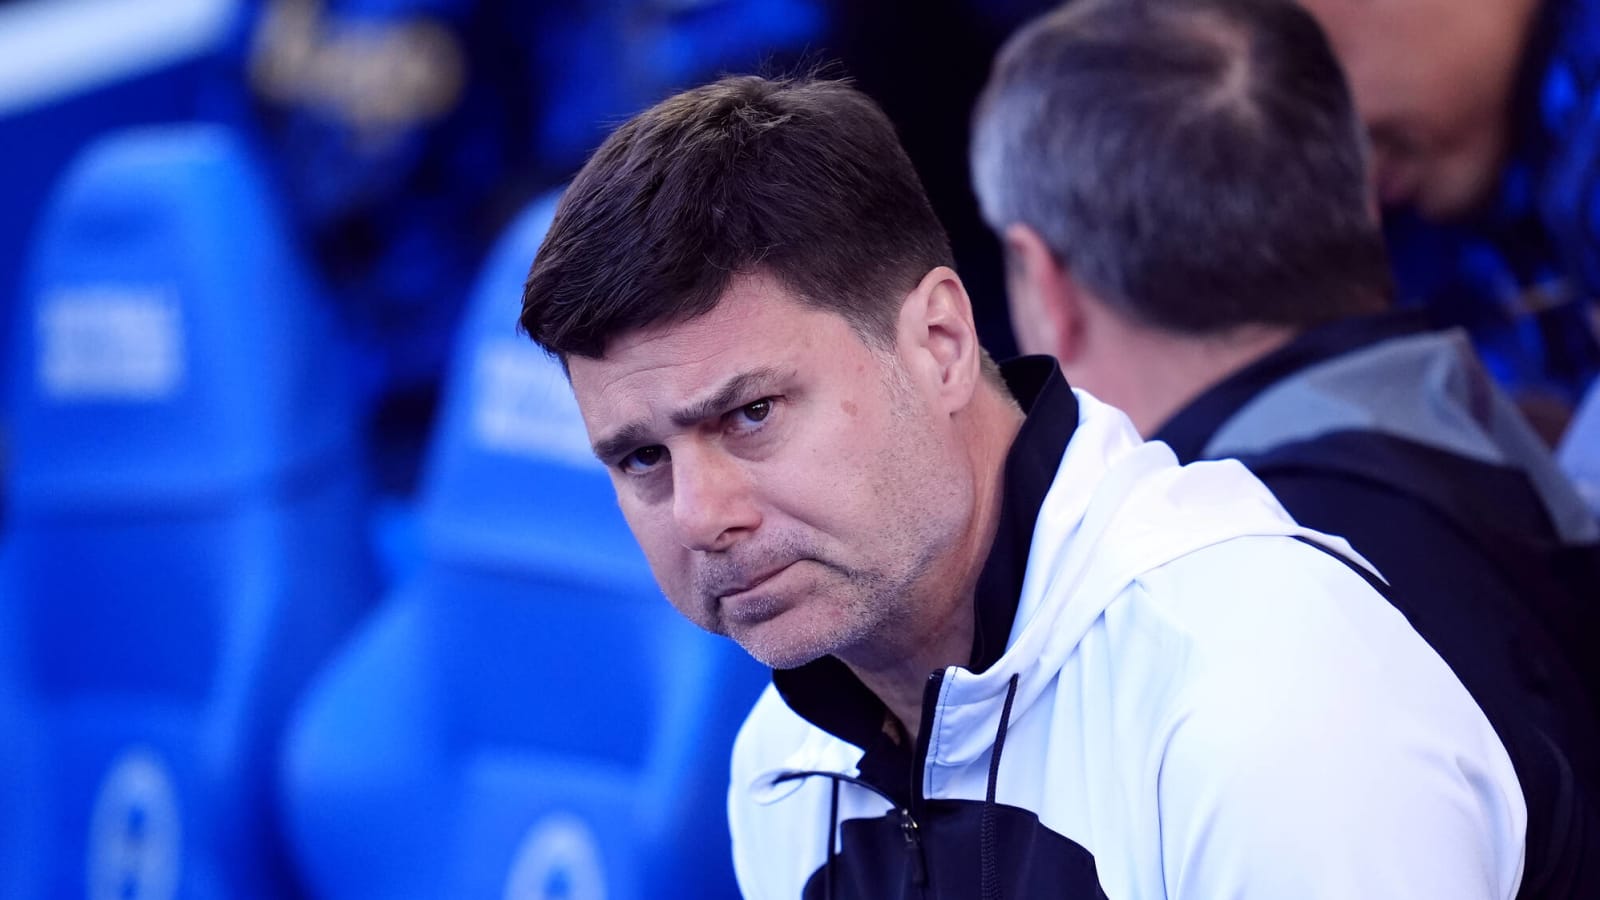 Chelsea have sounded out reps of two managers as Mauricio Pochettino replacements